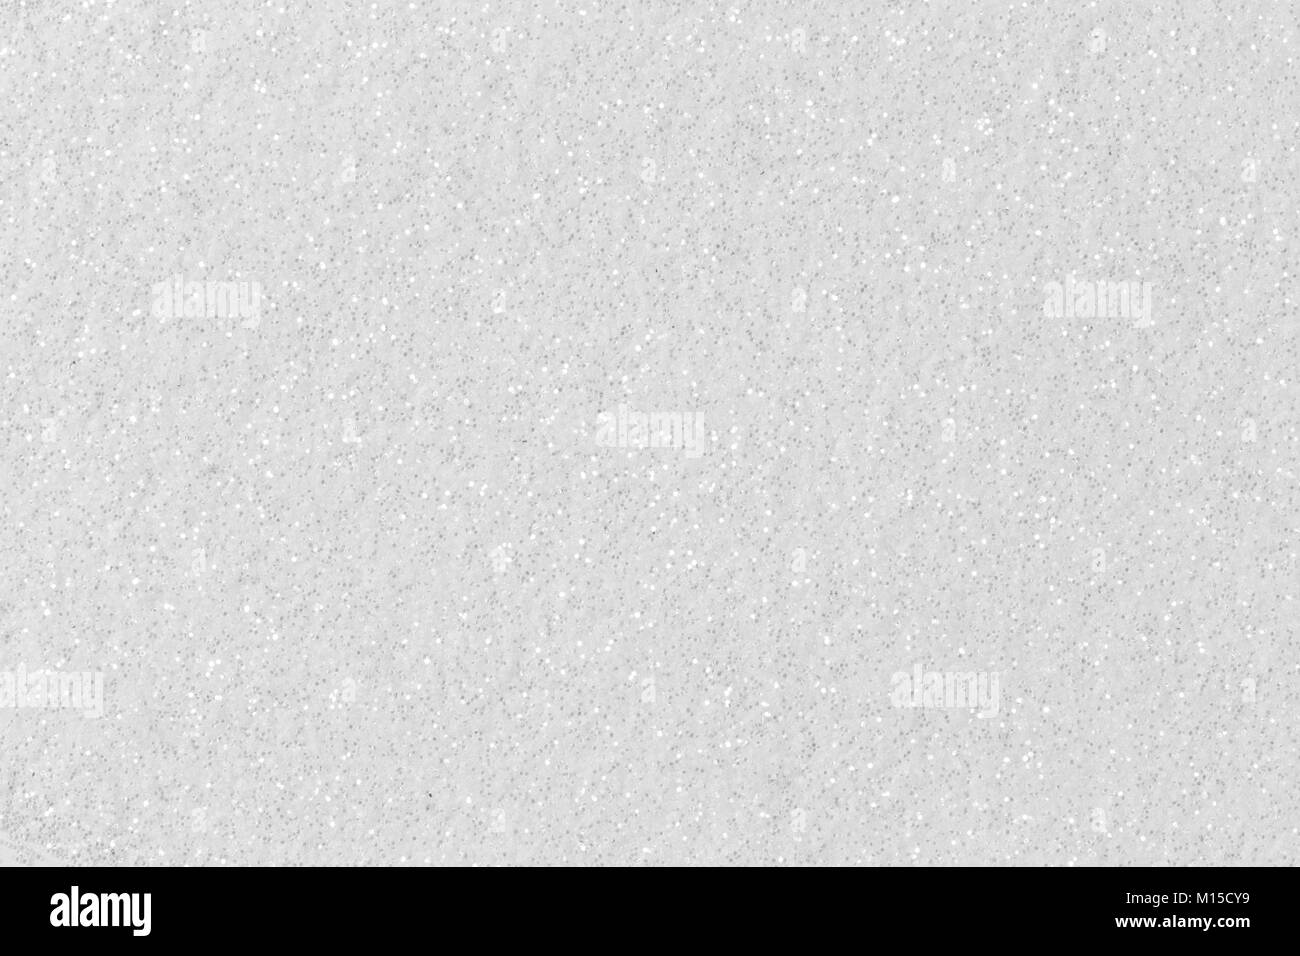 White glitter texture christmas background.  Low contrast photo. Stock Photo